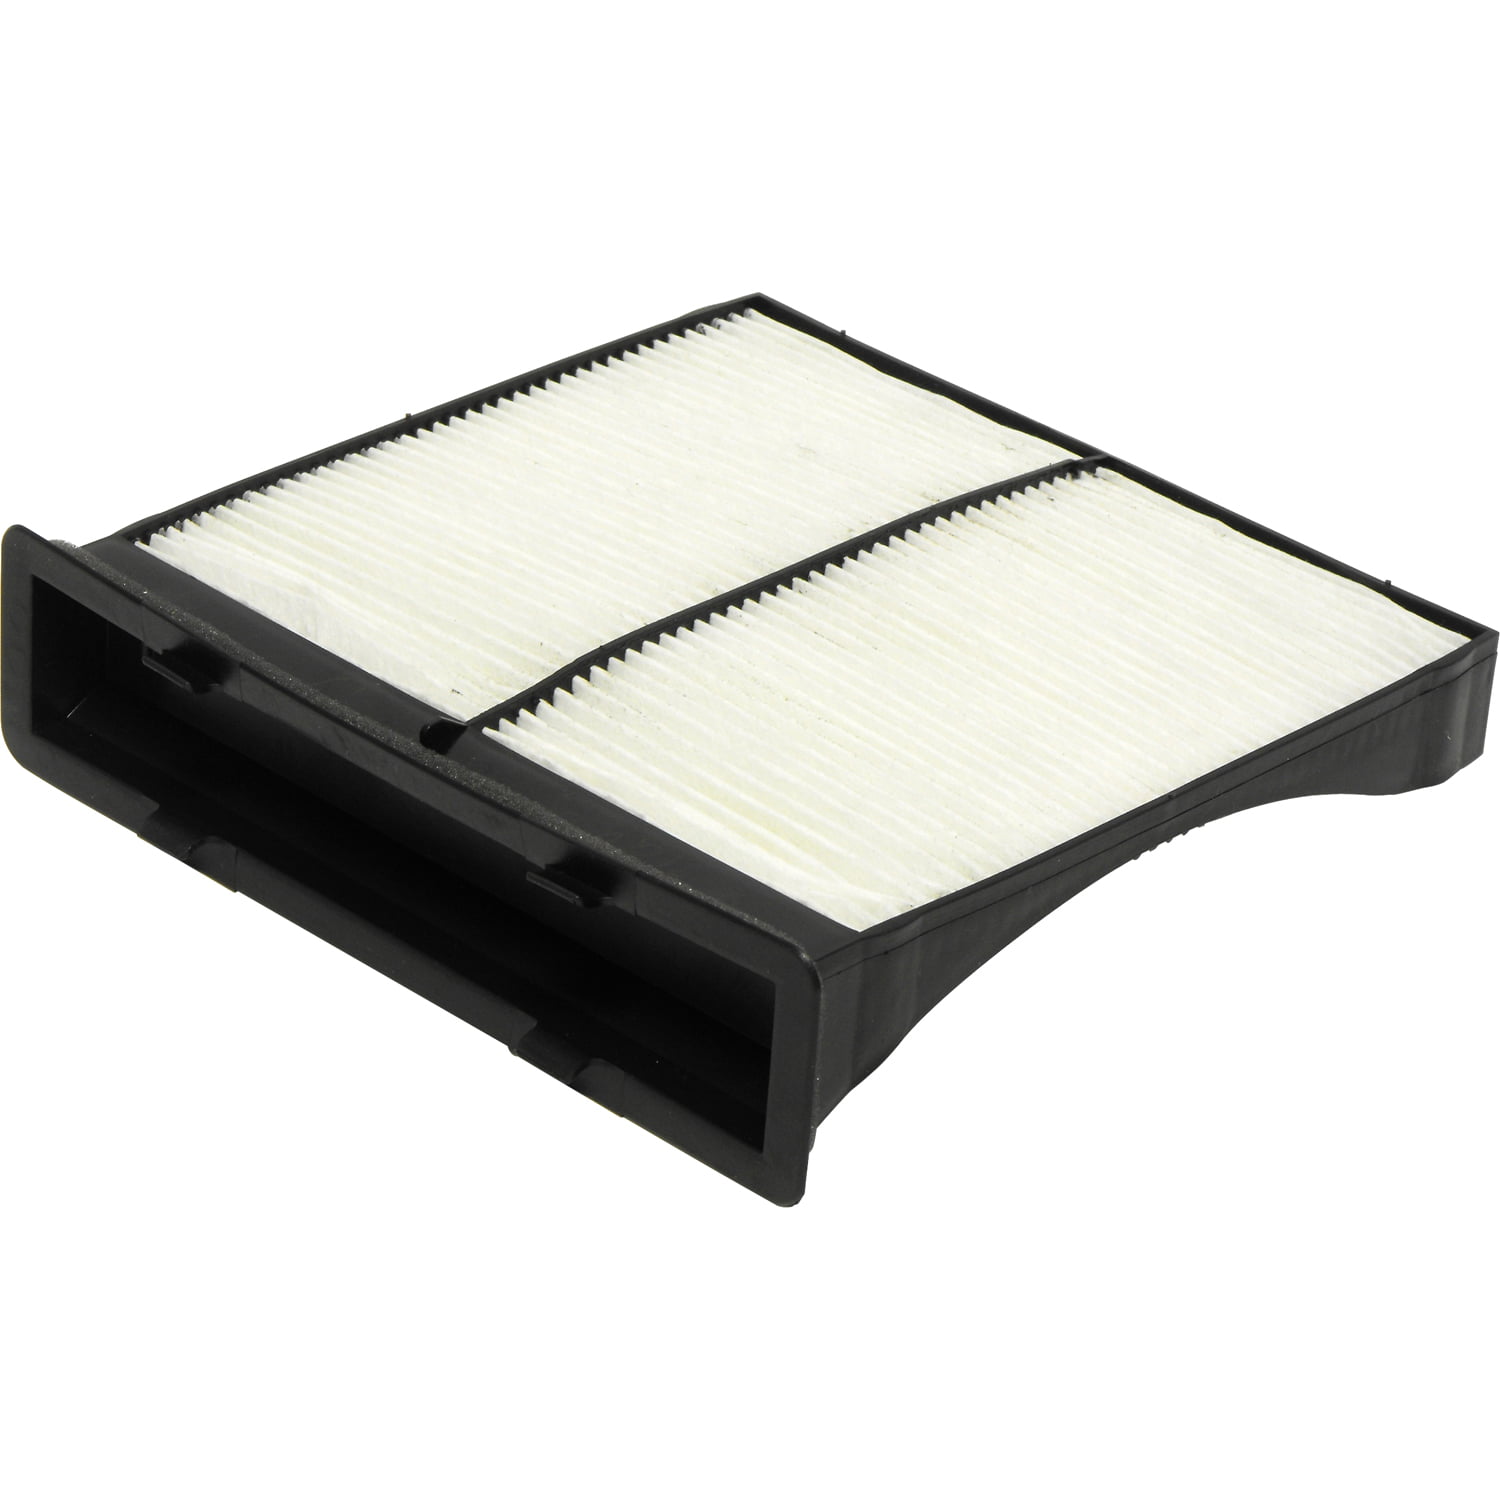 K&N VF2055 Cabin Replacement Air Filter for 08-19 Subaru XV WRX Forester Impreza 